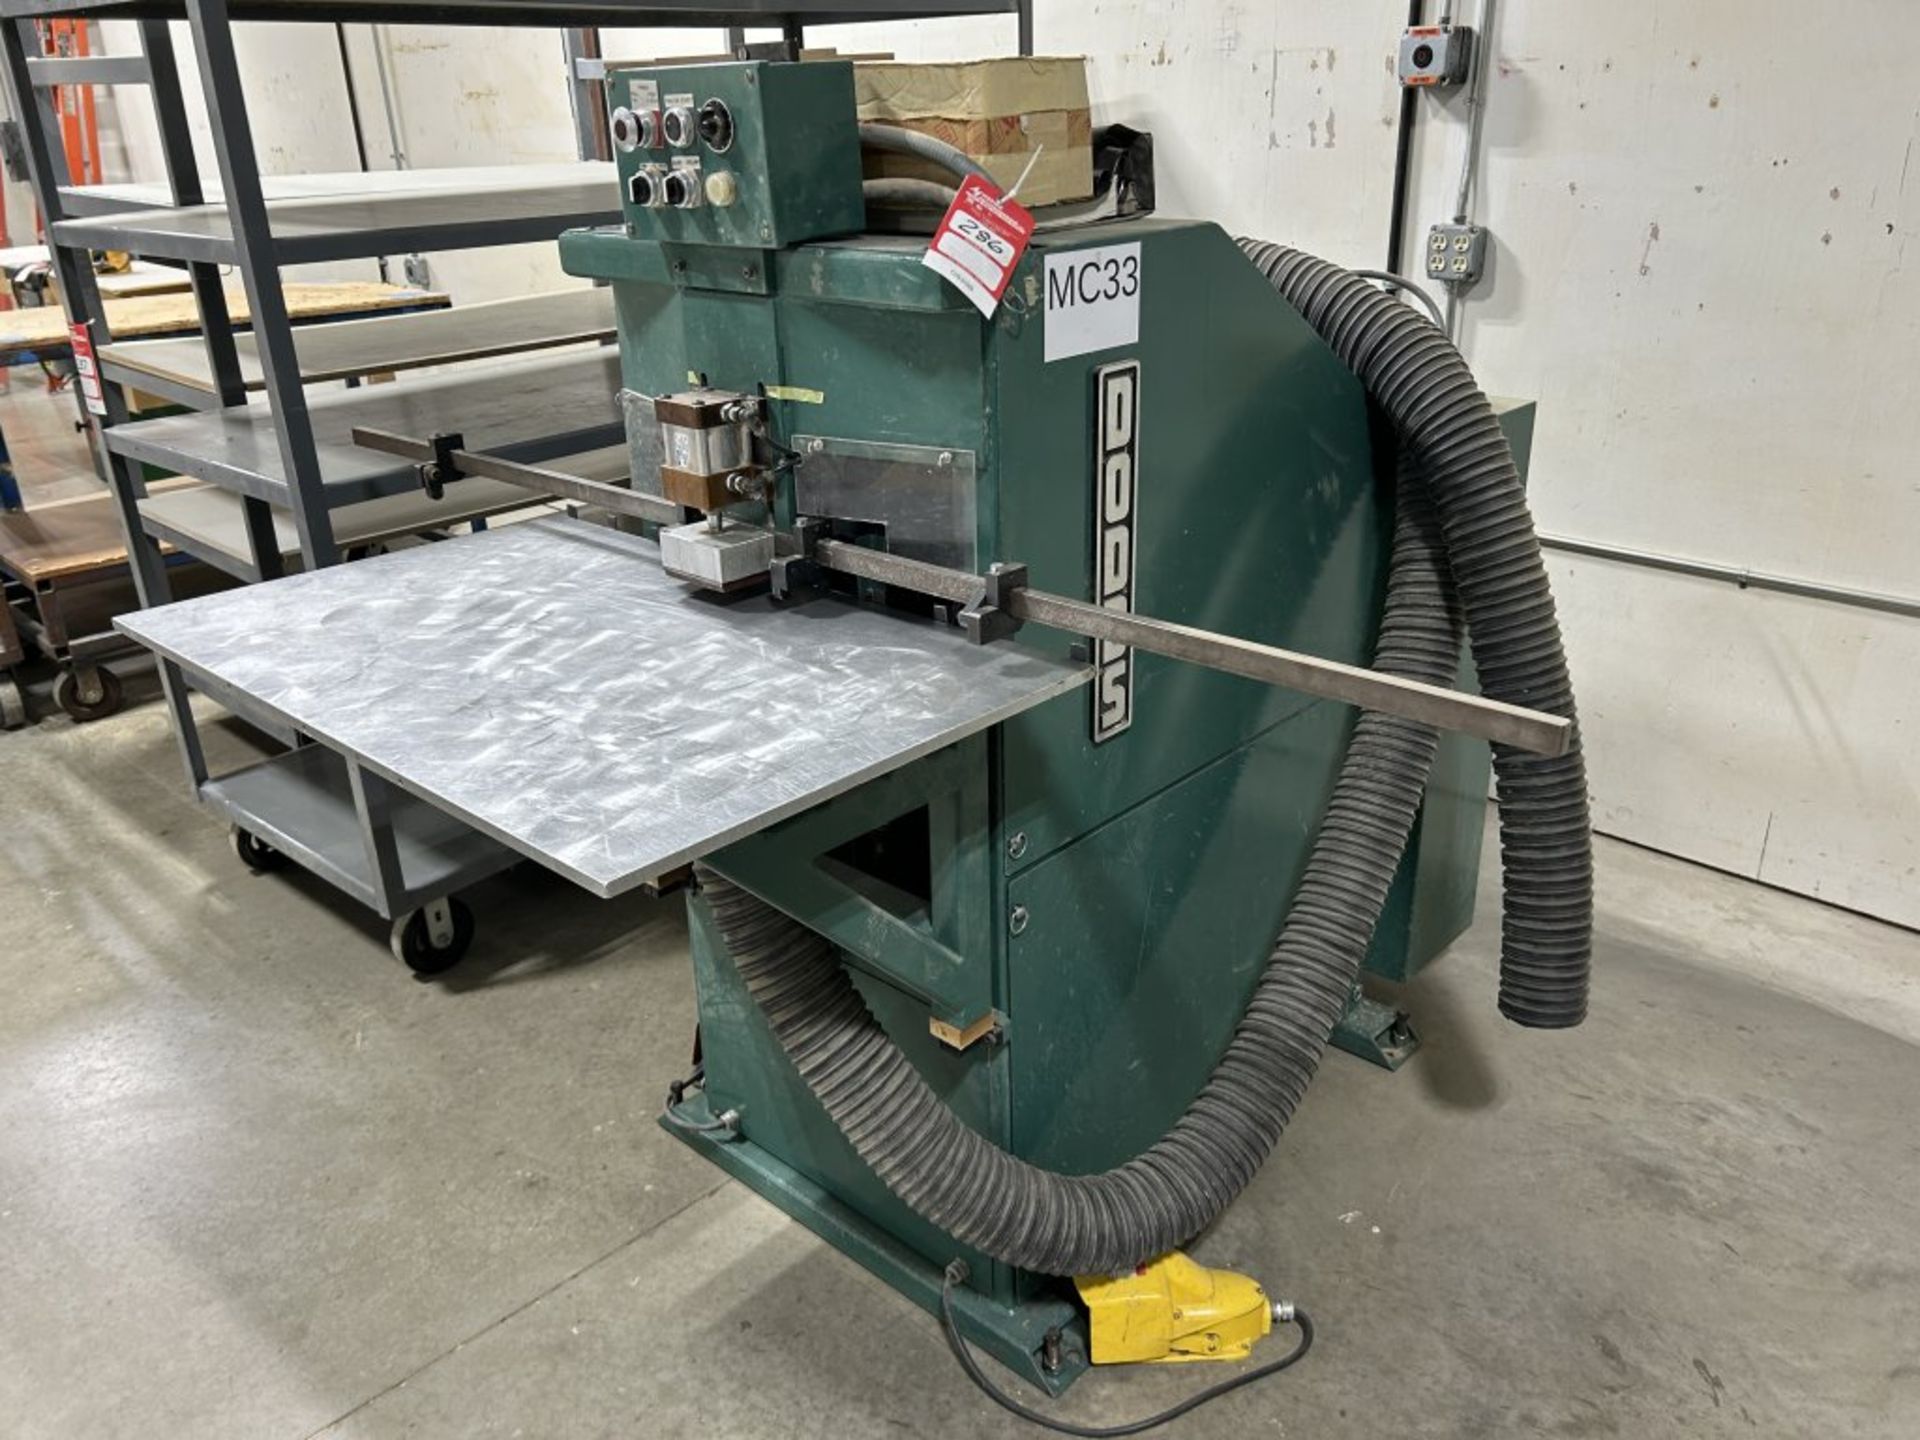 DODDS MB601 MORTISE AND BORE MACHINE, FOOT PEDAL CONTROLS, 480V, 3-PHASE, S/N: MB96123-645